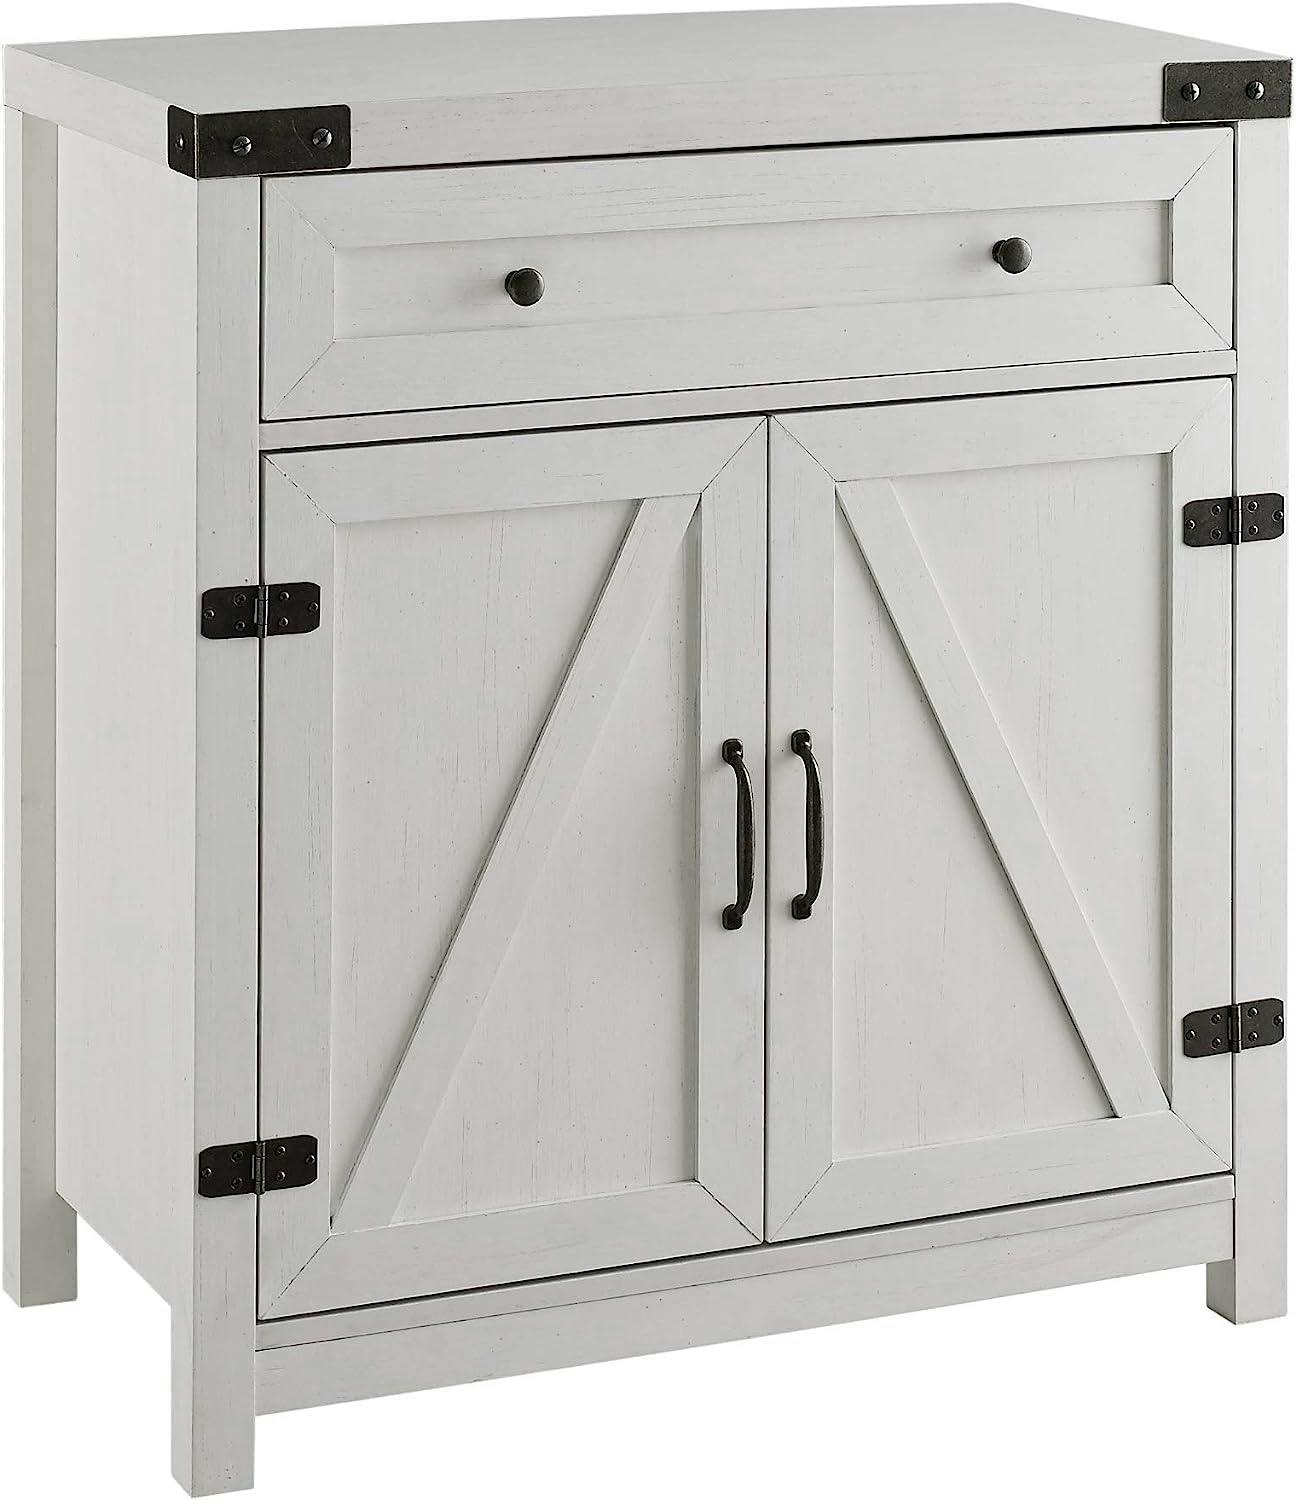 30" Brushed White Farmhouse Barn Door Accent Cabinet with Adjustable Shelves